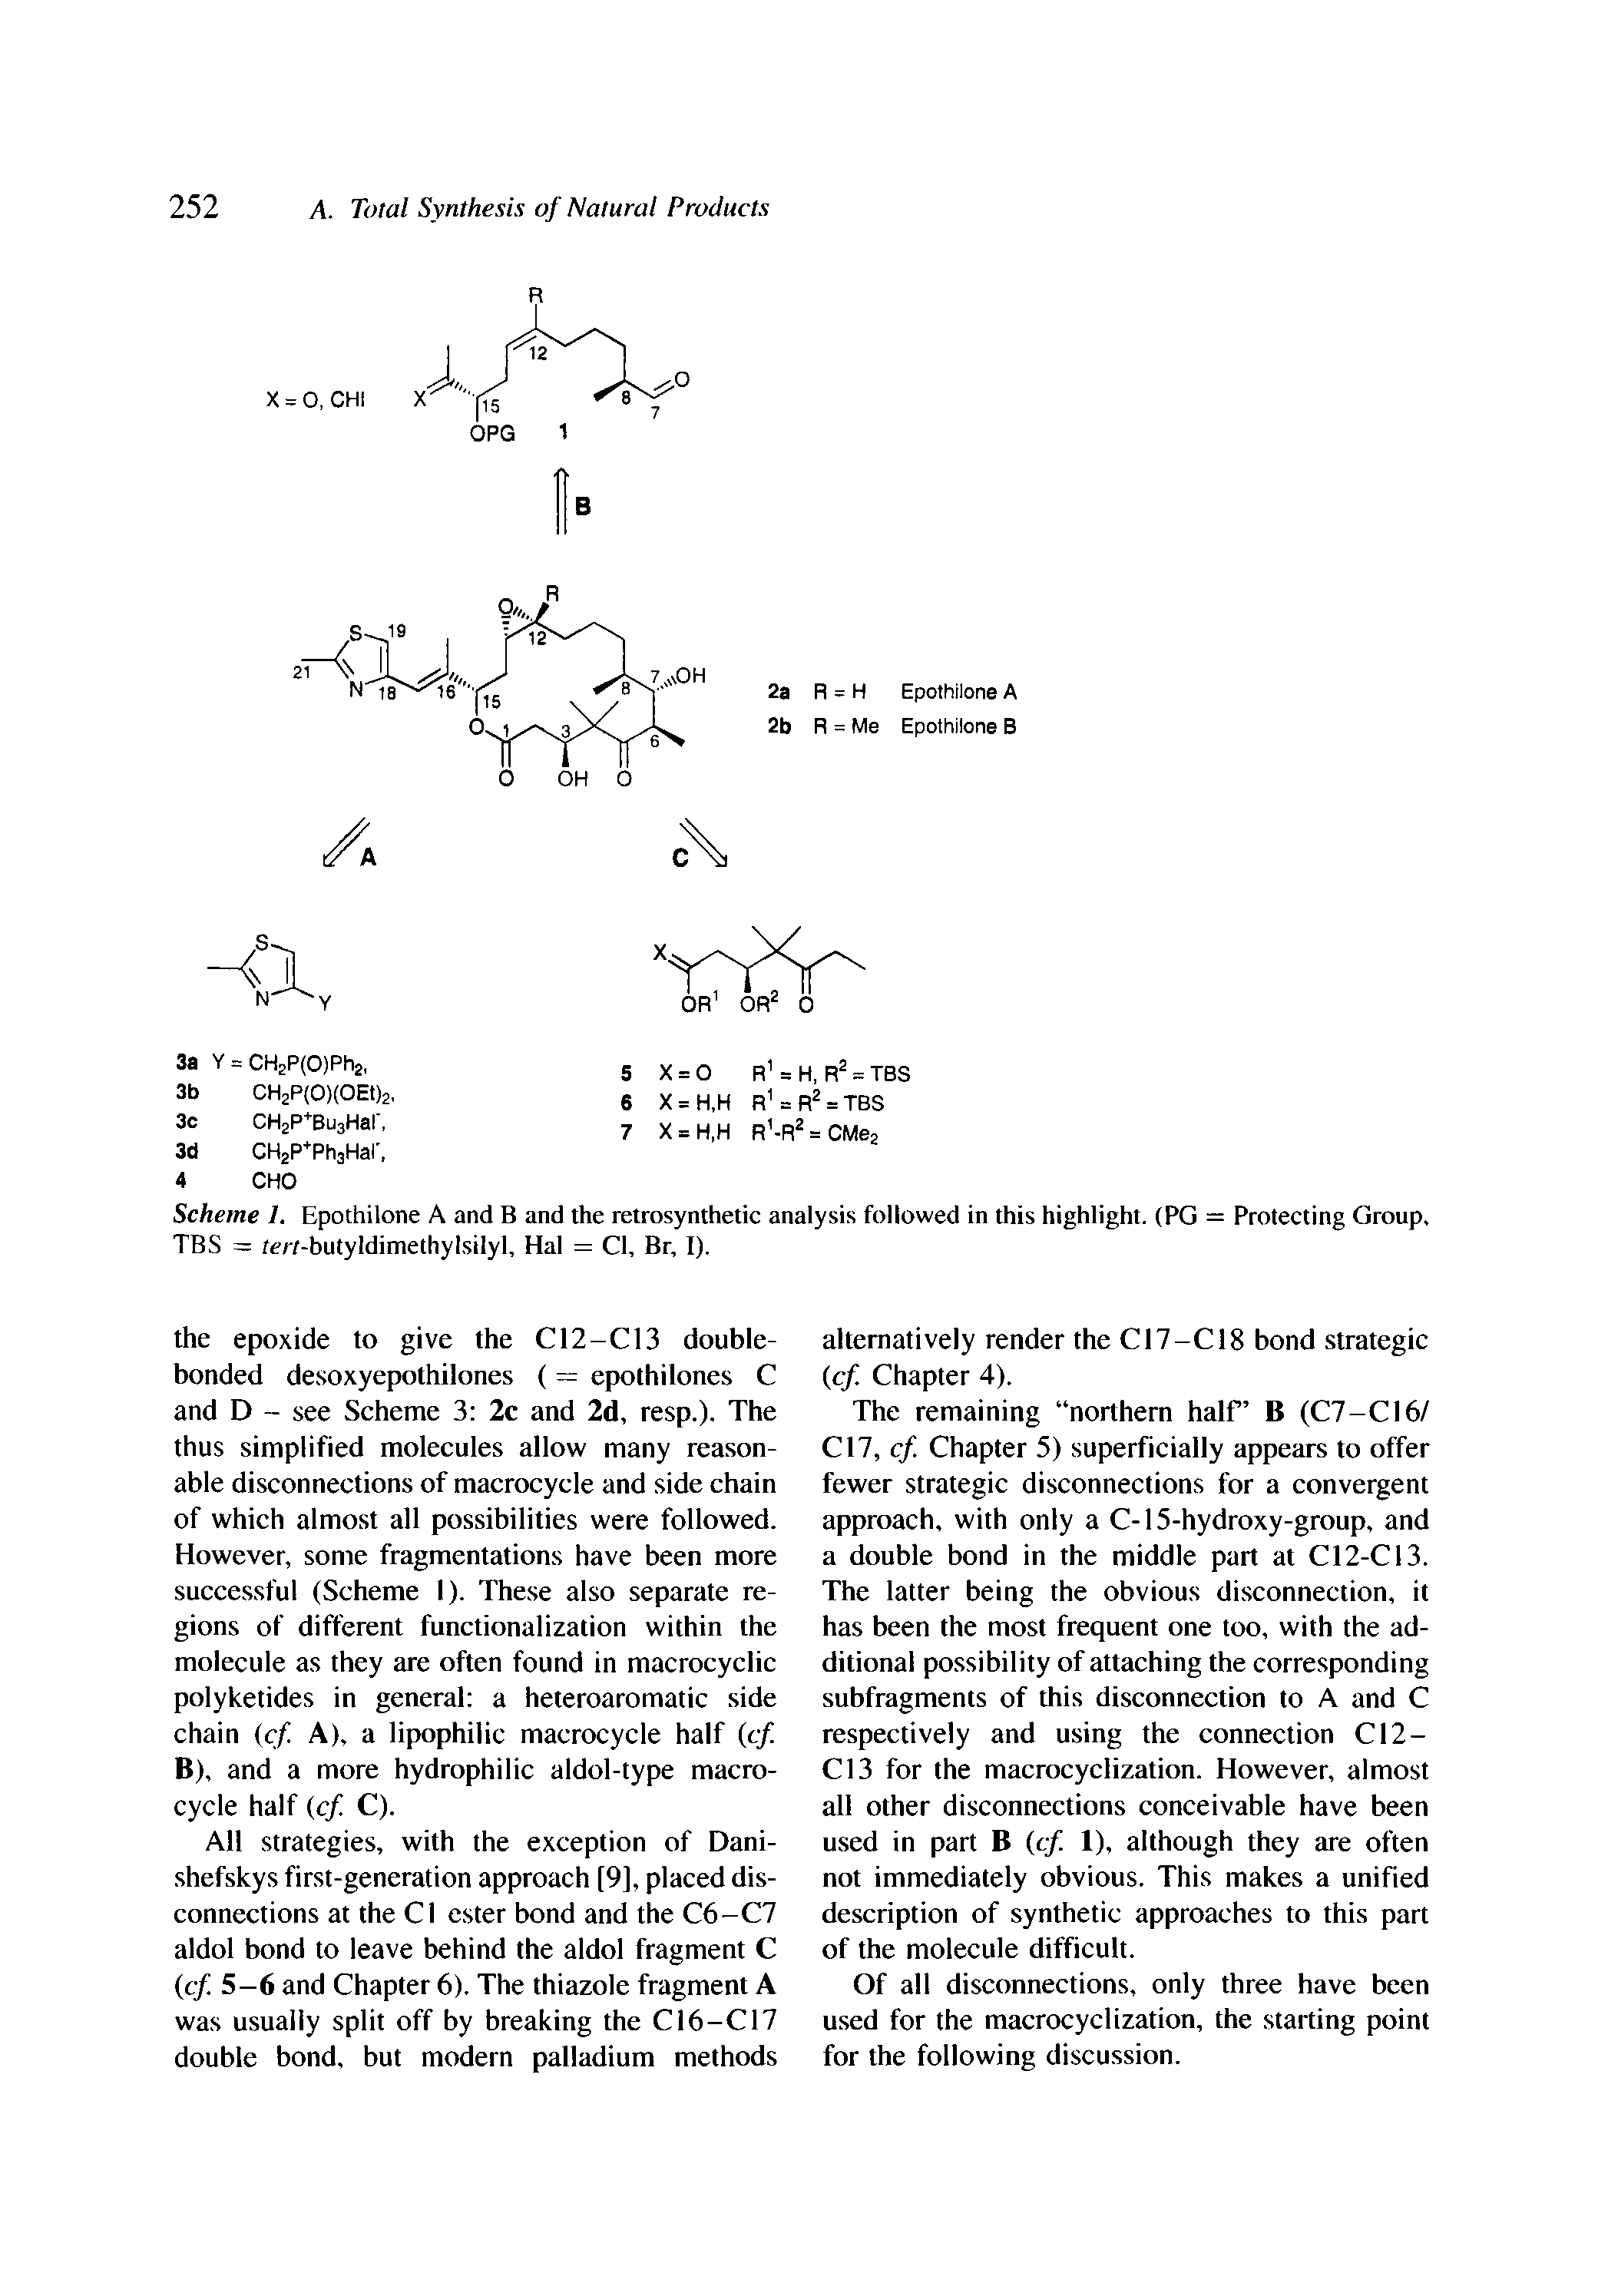 Scheme I. Epothilone A and B and the retrosynthetic analysis followed in this highlight. (PG = Protecting Group, TBS = fm-butyldimethylsilyl, Hal = Cl, Br, I).